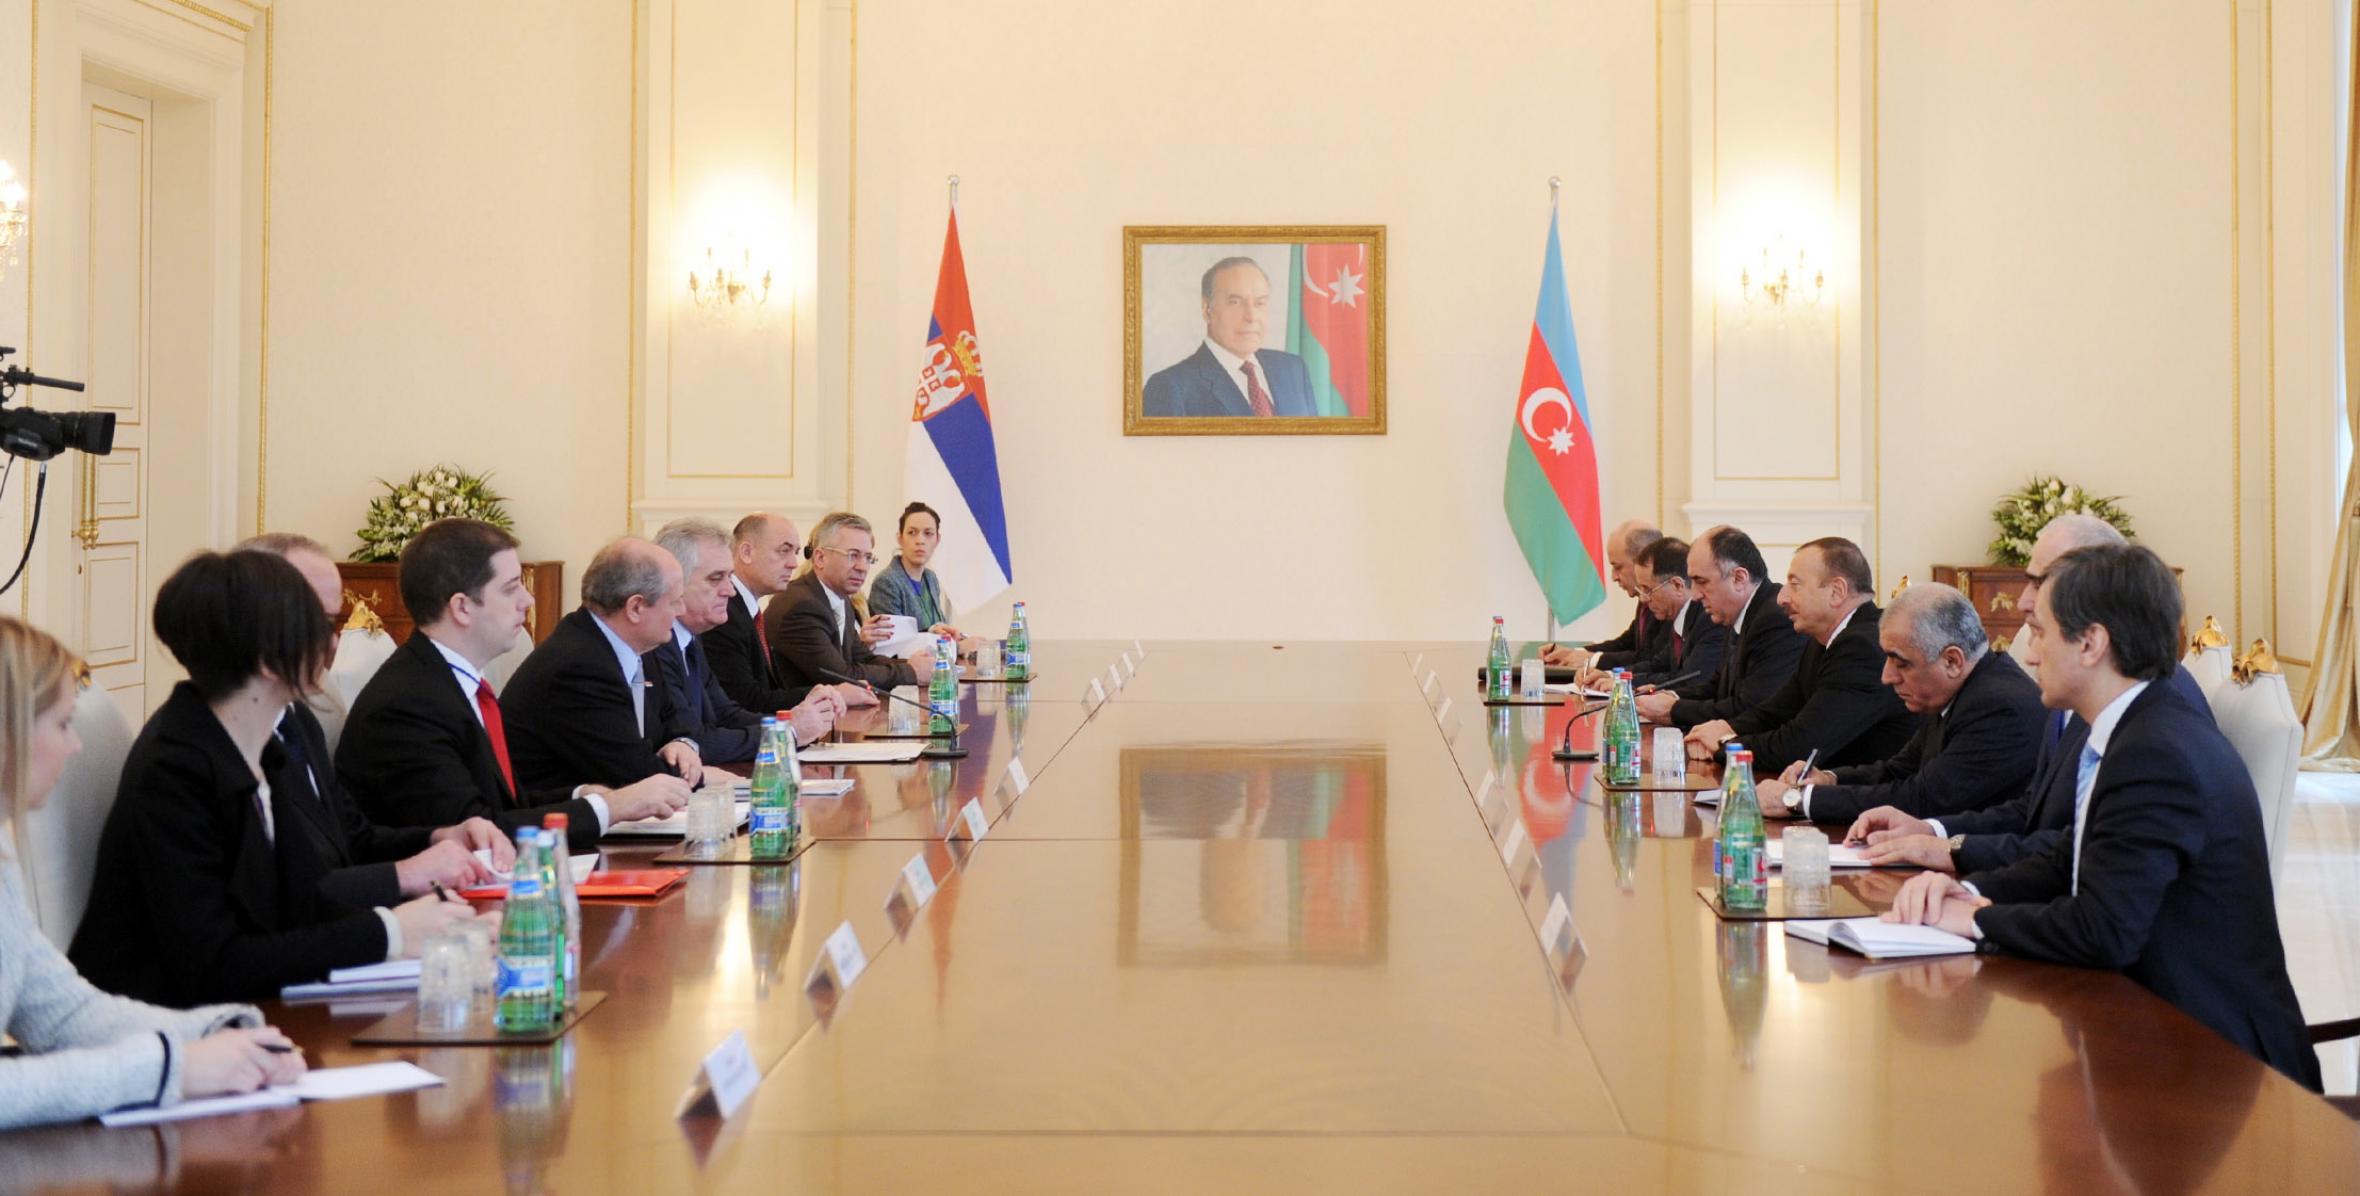 Ilham Aliyev and President of the Republic of Serbia Tomislav Nikolic held a meeting in an expanded format